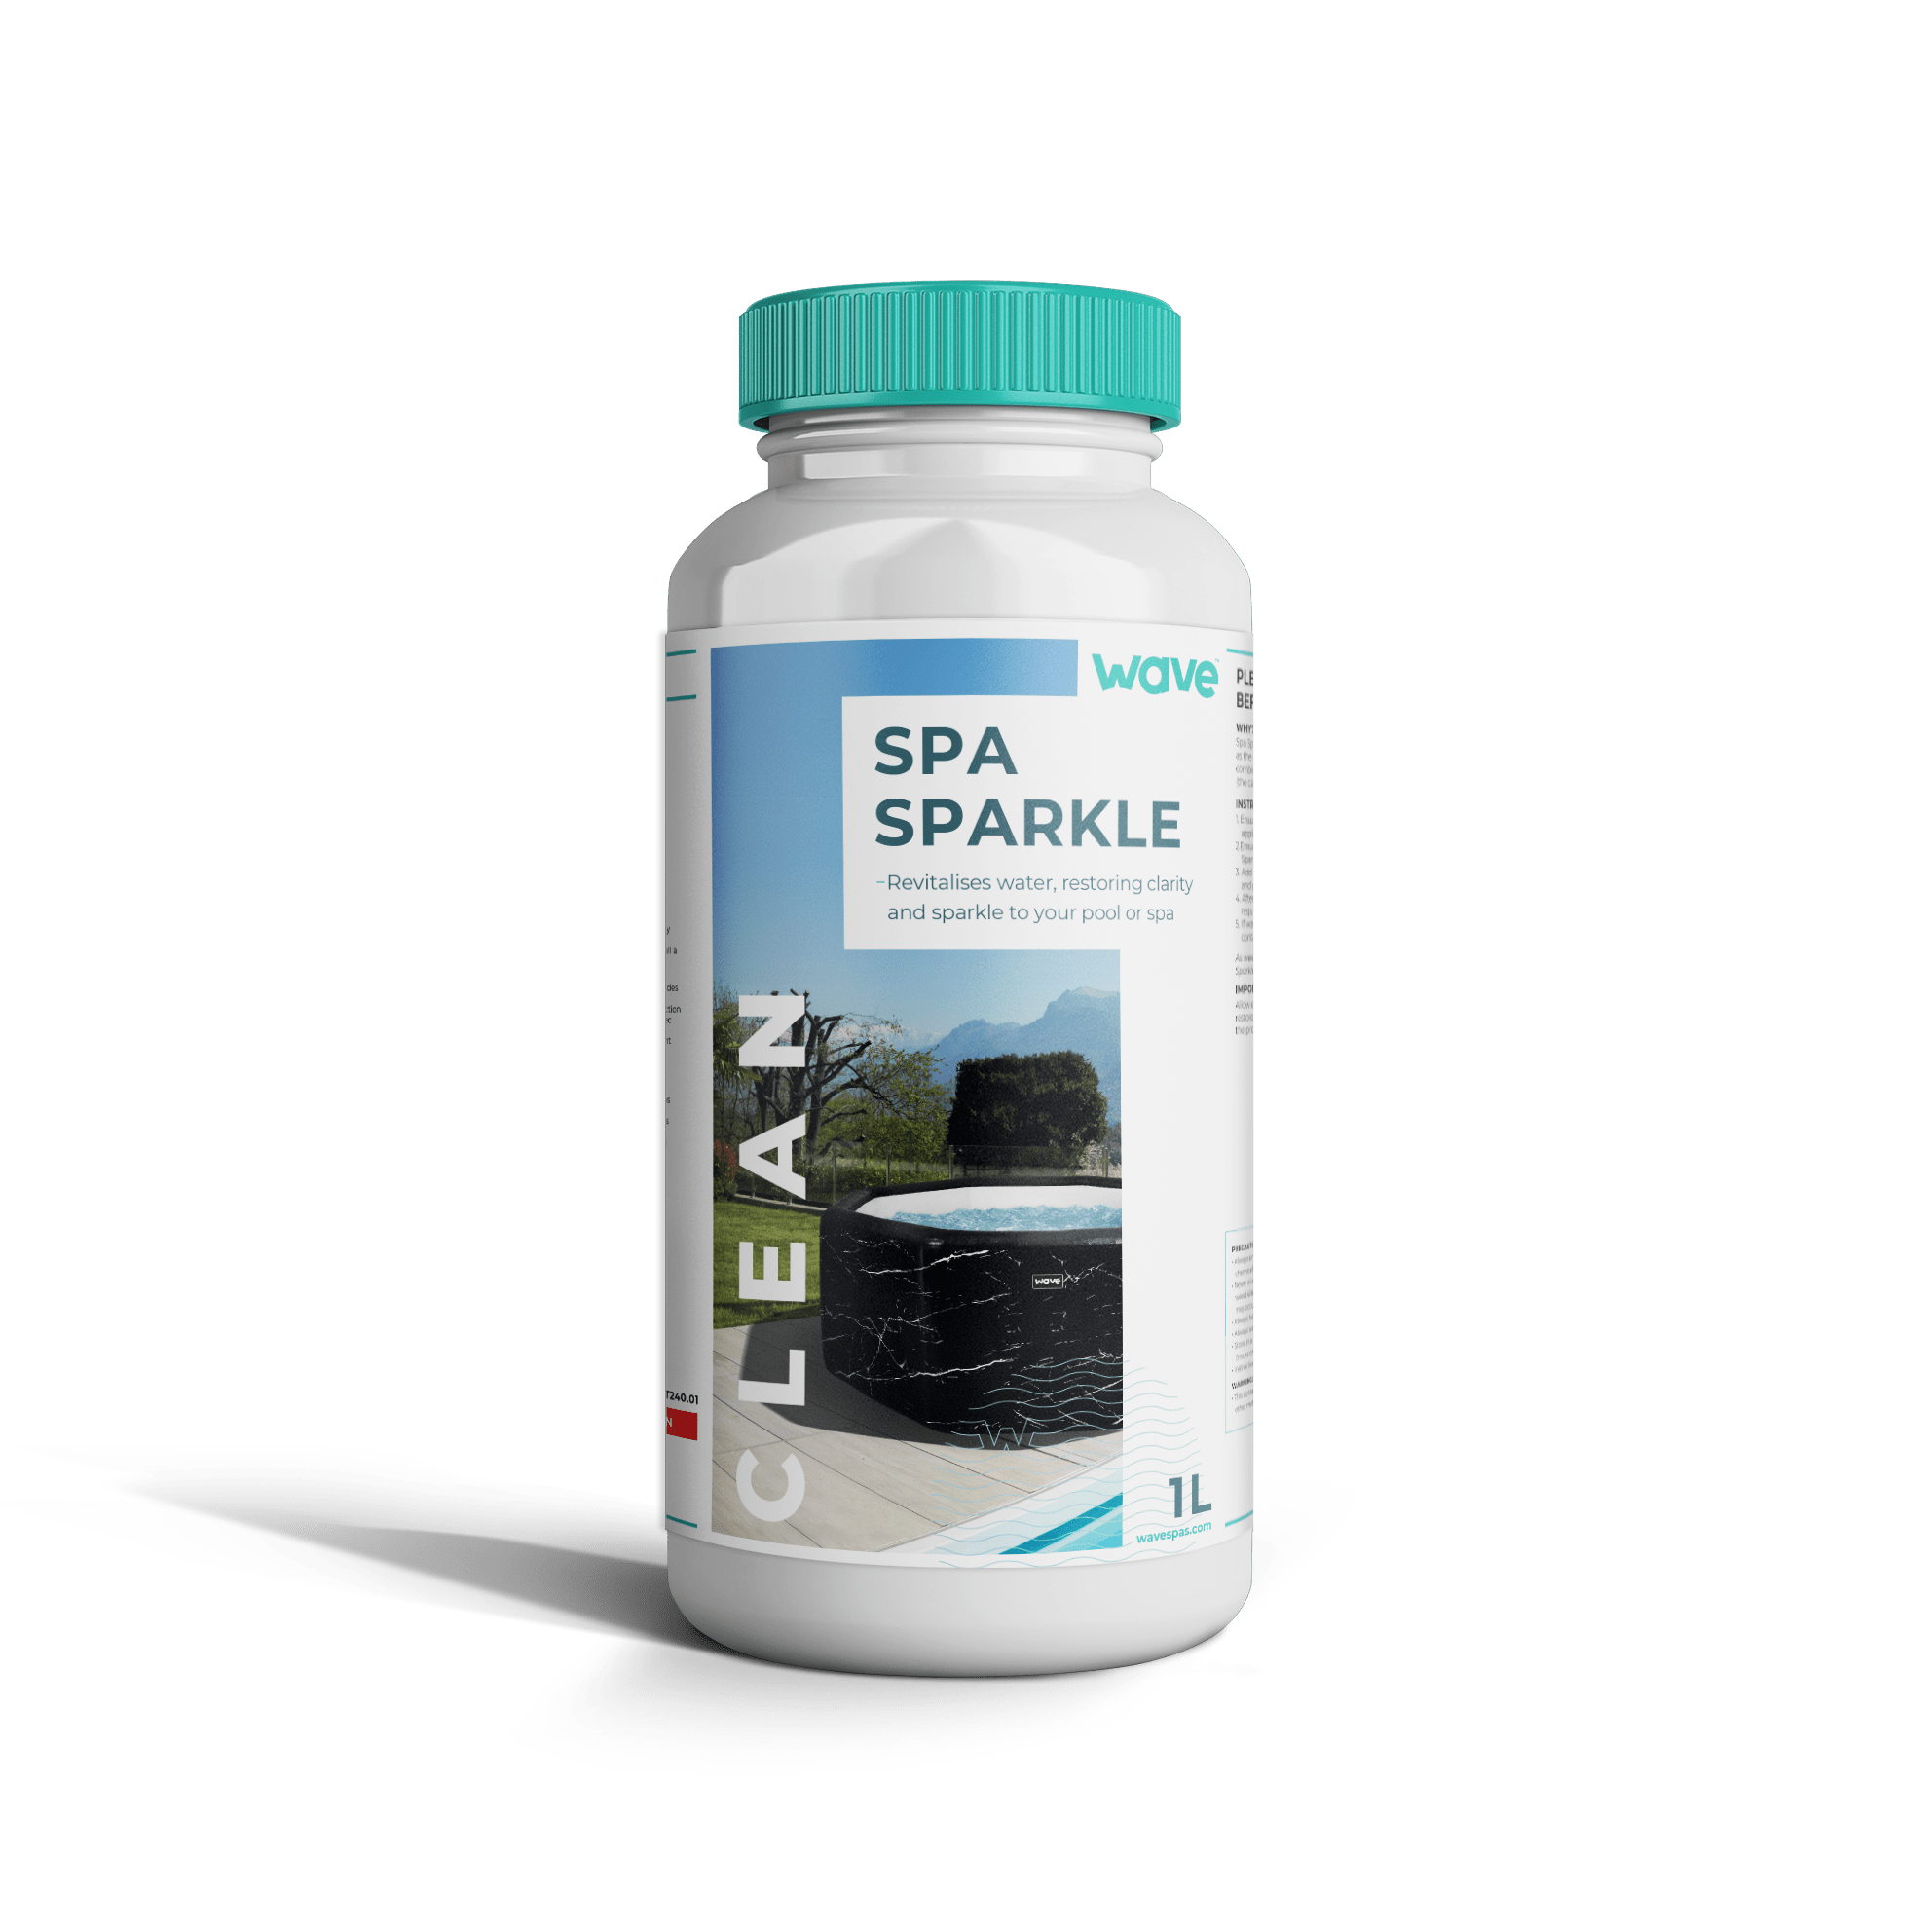 Hot Tub Sparkle Clarifier | Pool and Spa | 1L - Spa Chemicals - Wave Spas USA